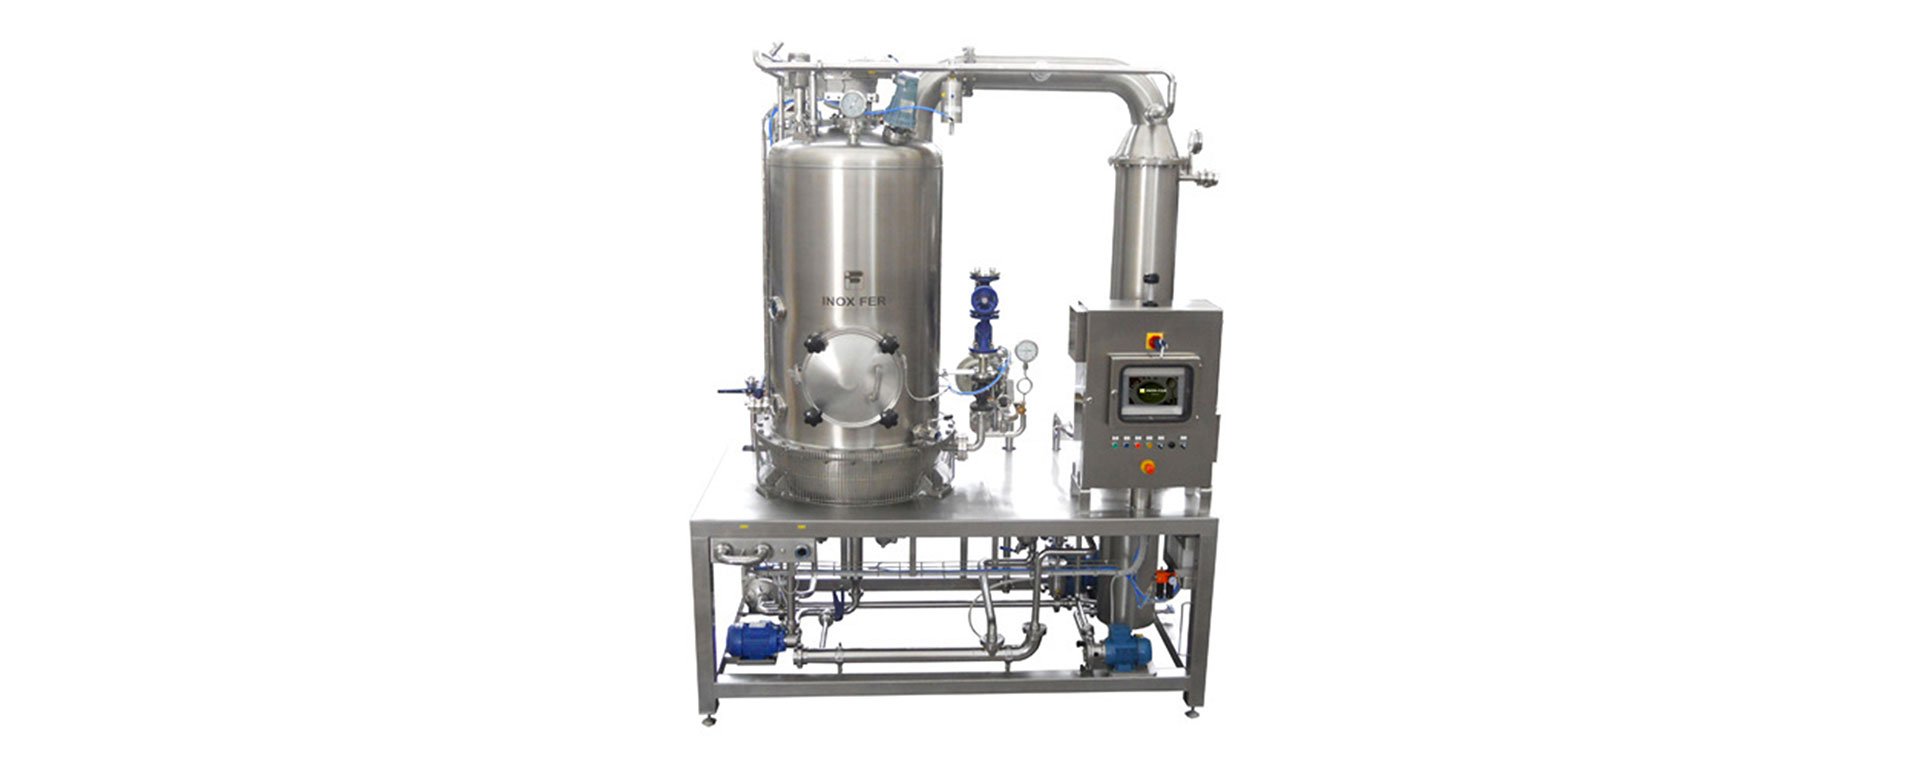 Double jacketed steam kettle